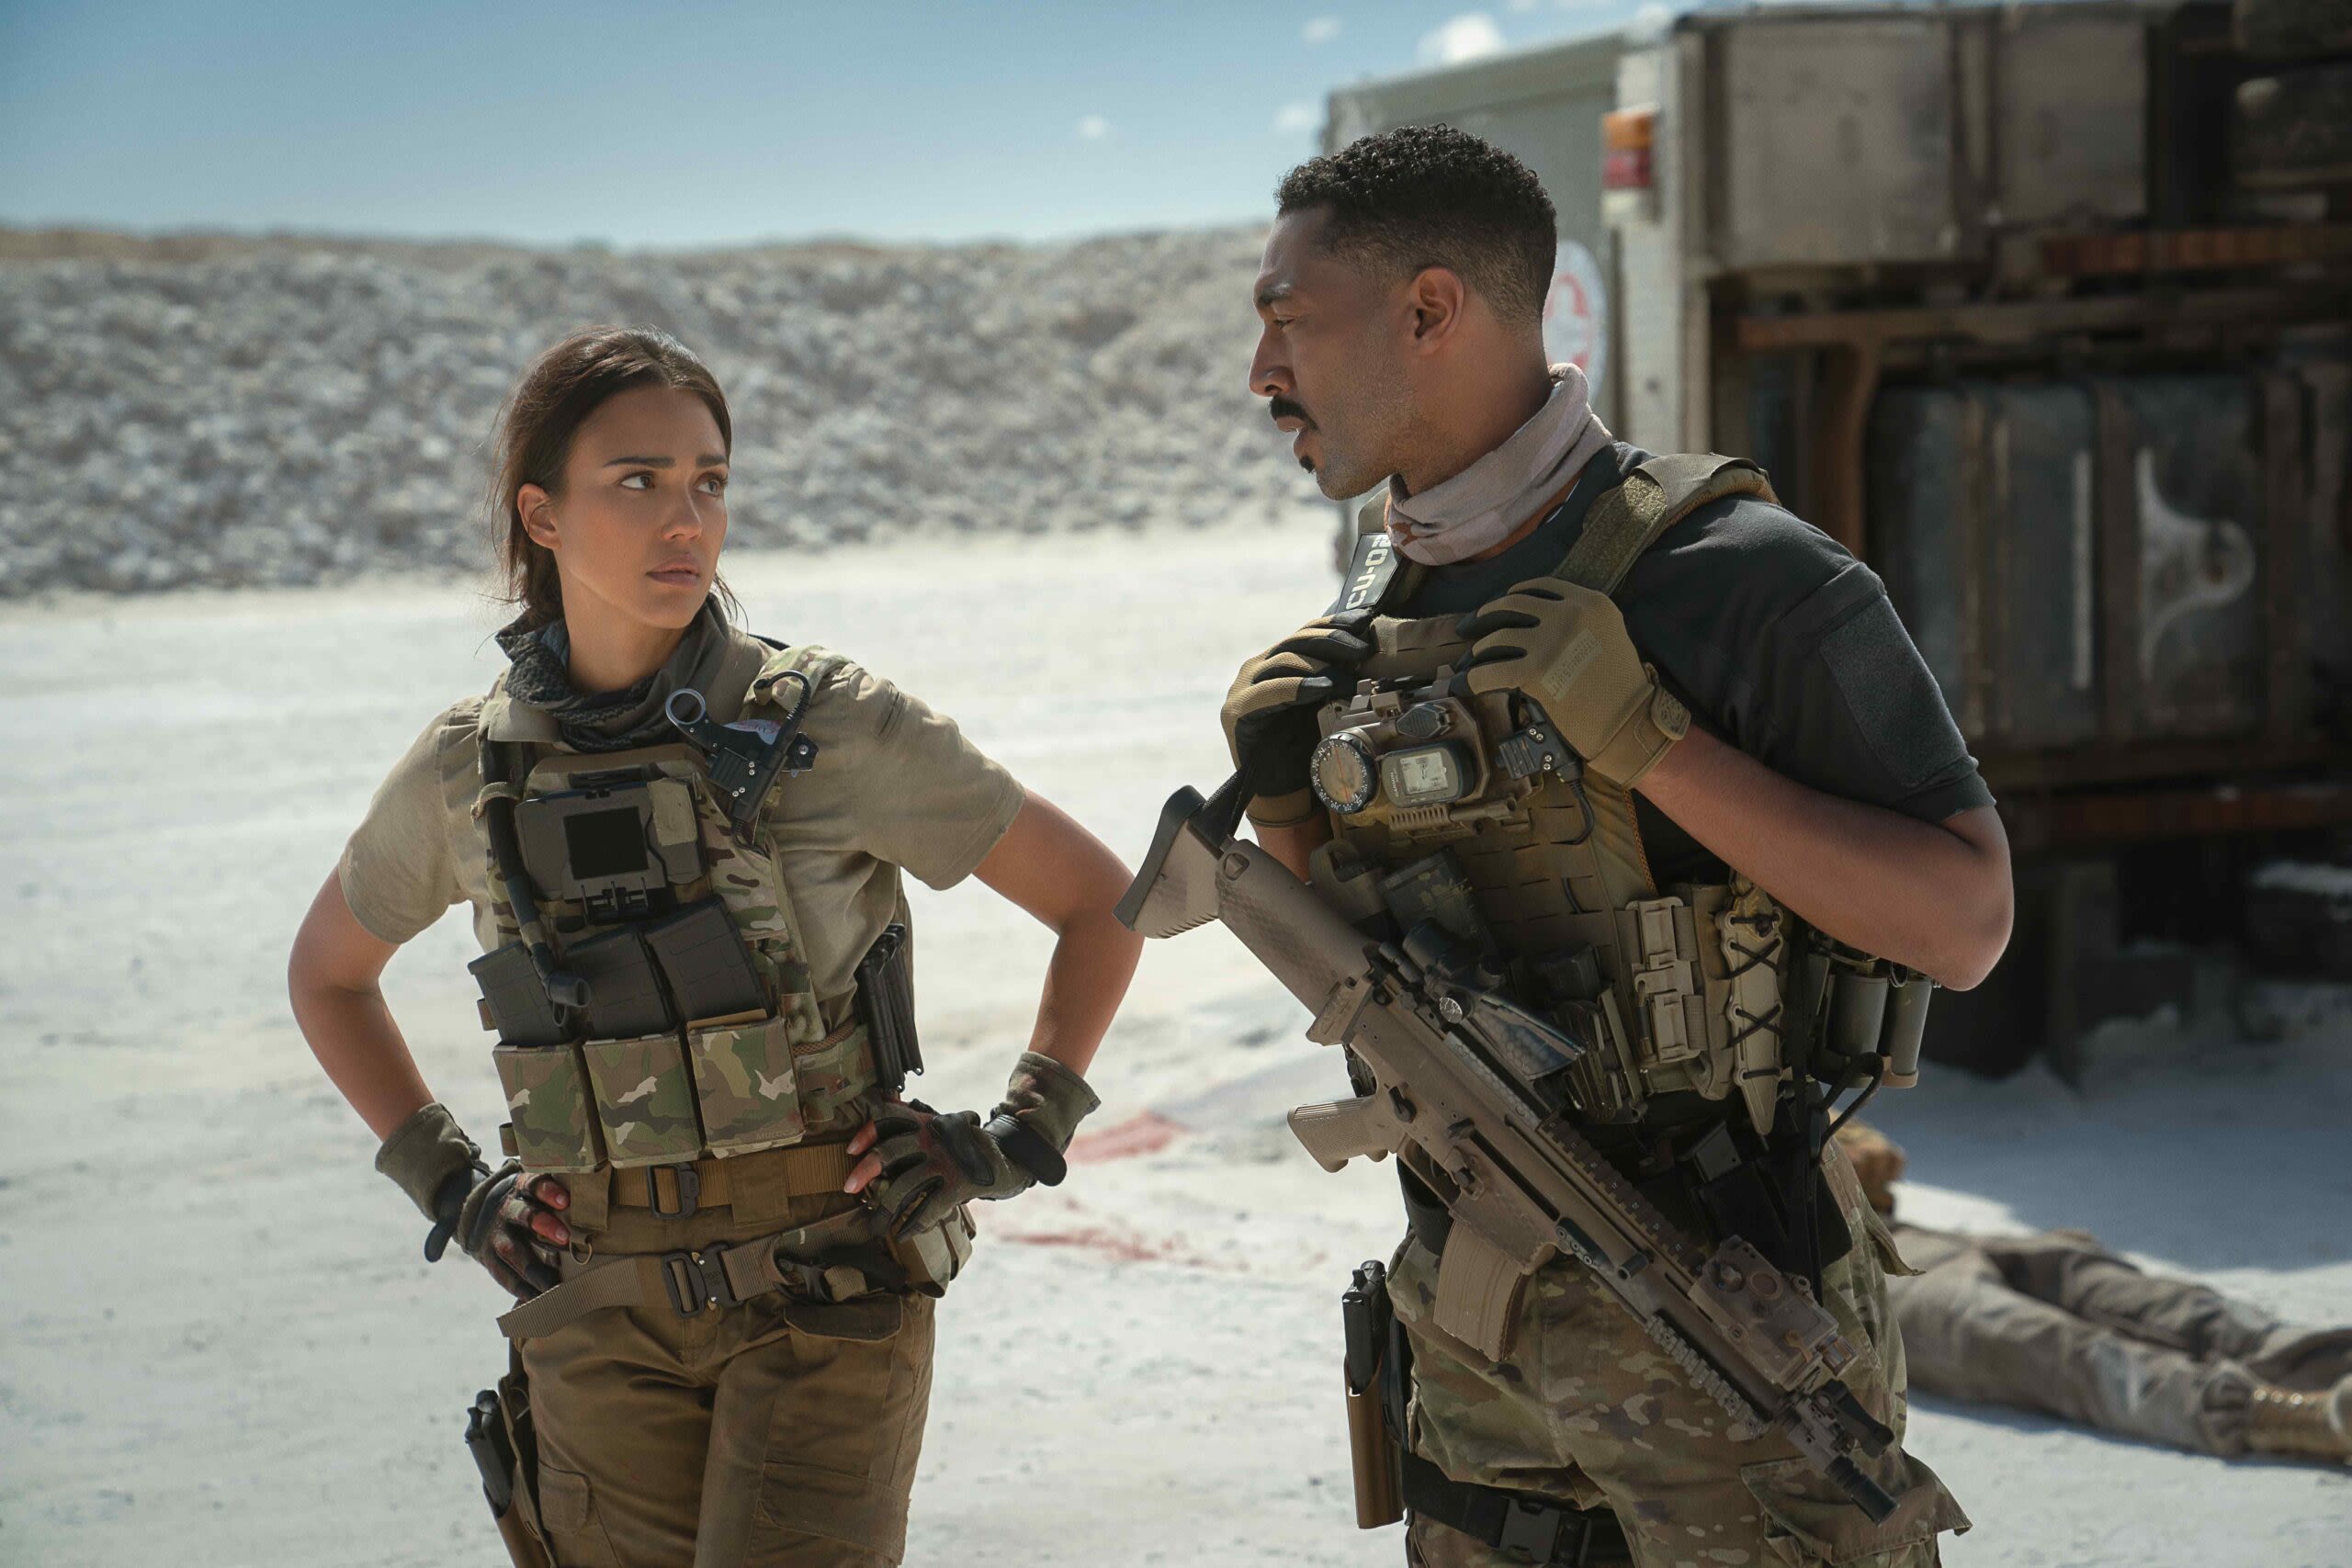 ‘Trigger Warning’ Trailer: Jessica Alba, Tone Bell And More In Netflix Action Film